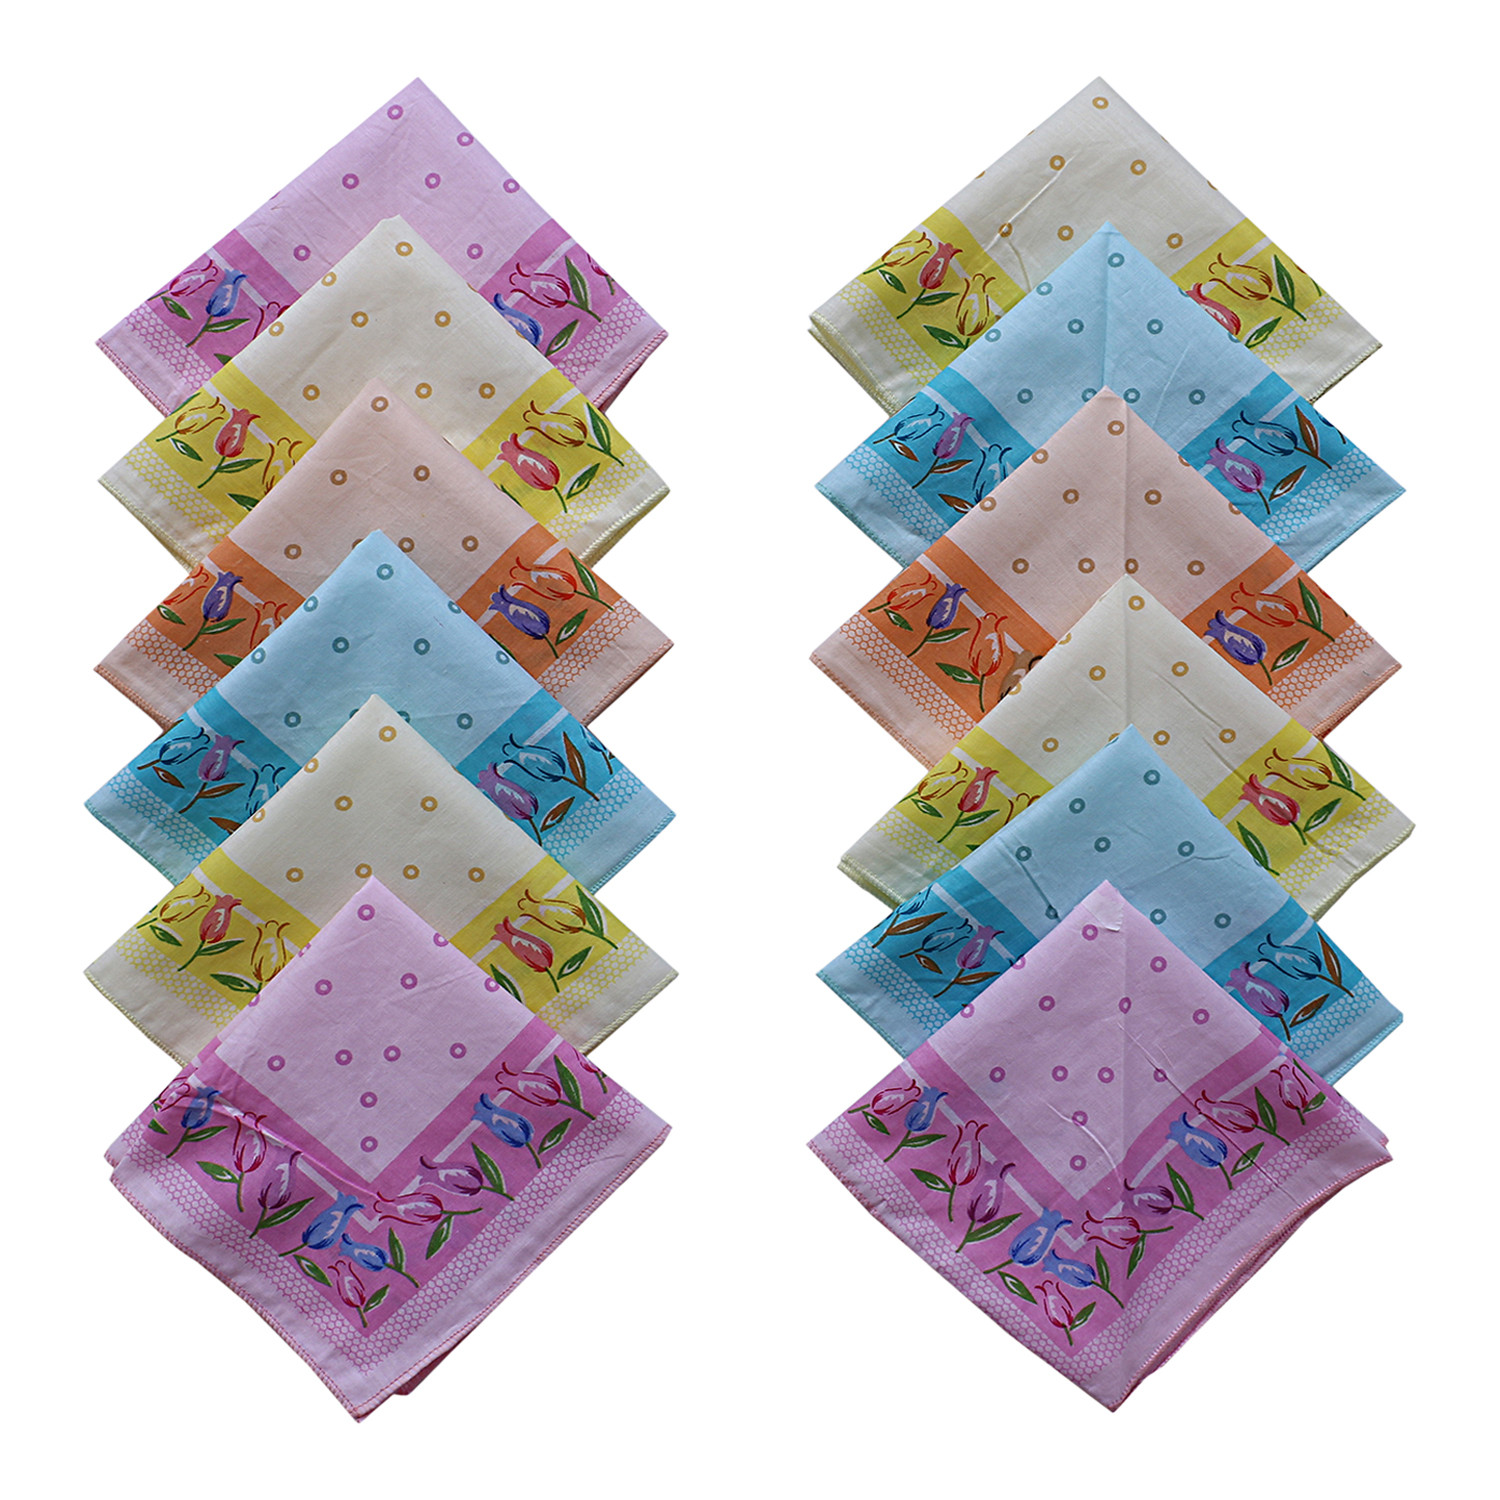 Kuber Industries Handkerchiefs|Rose Bud Print Soft Cotton Hankies For Woman,Girls & Wicking Sweat from Hands,Face,Set of 12 (Multicolor)